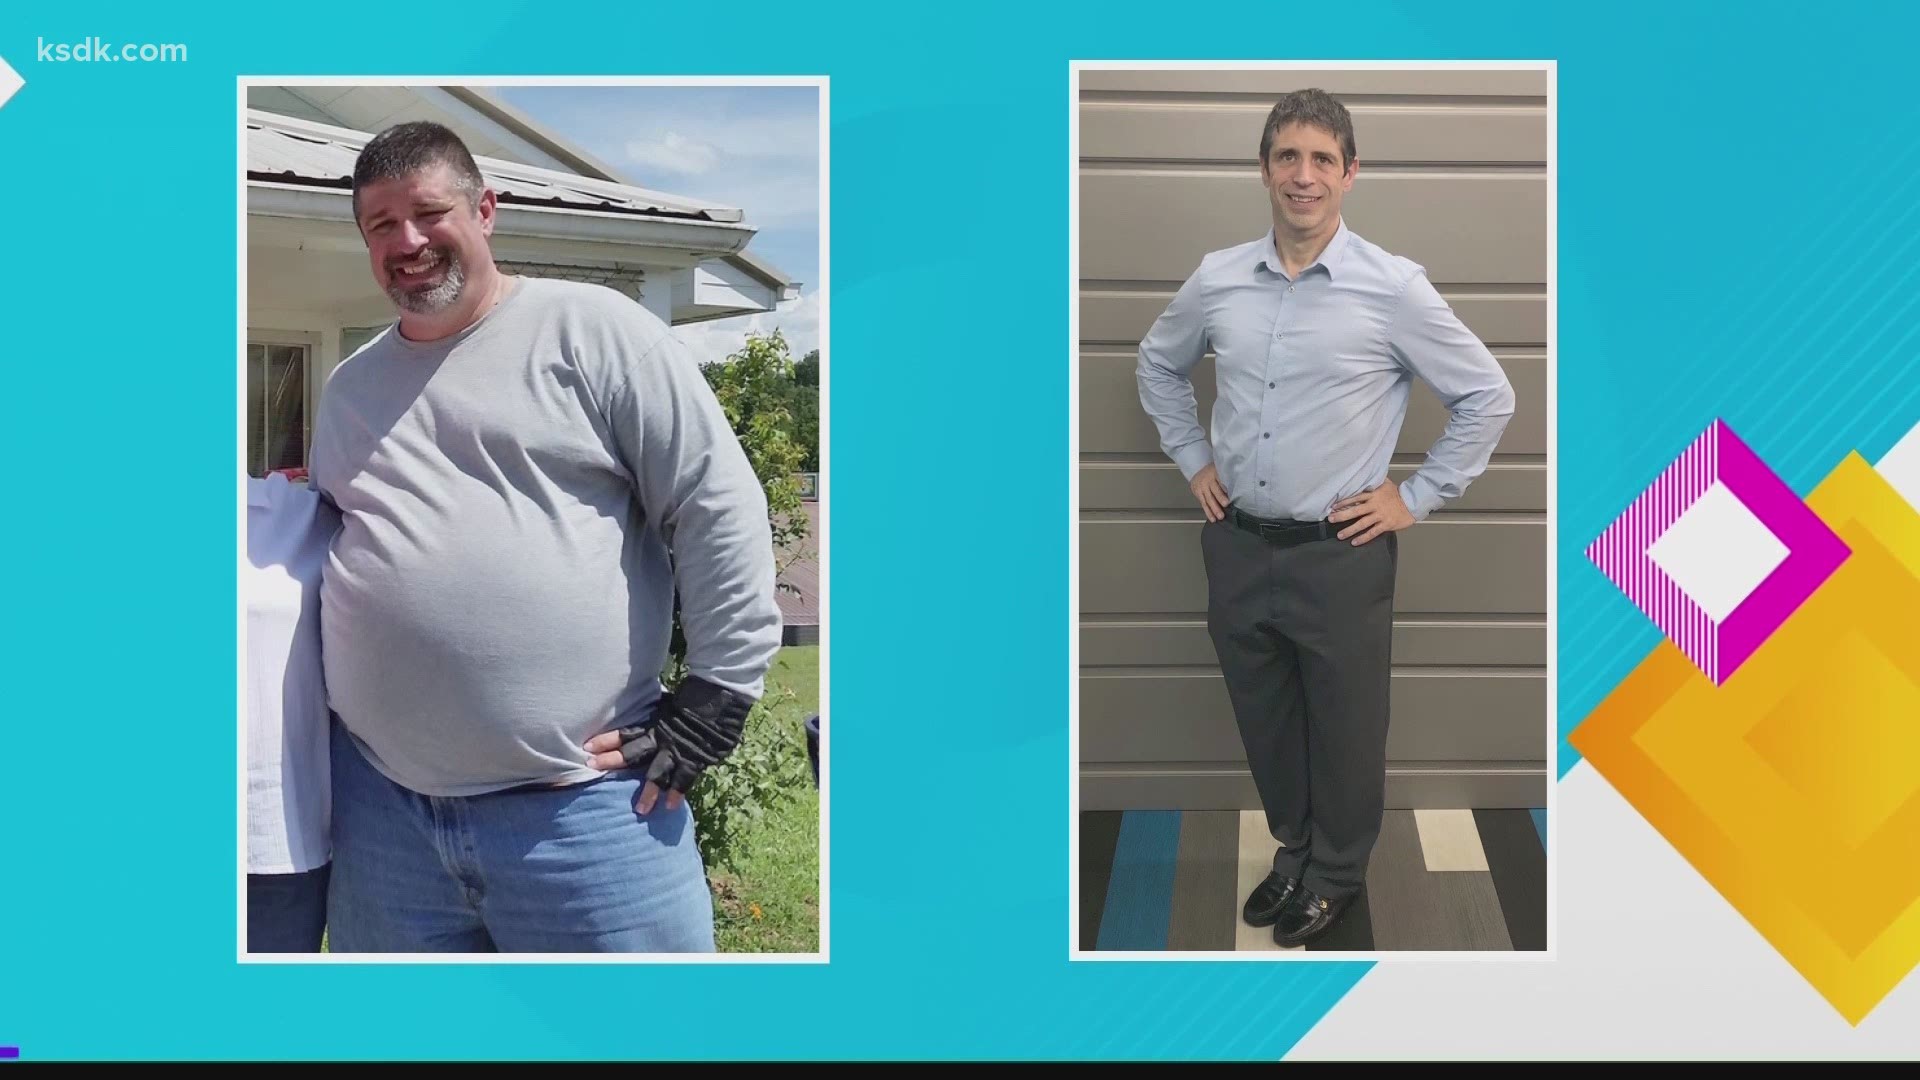 Charles introduces us to another successful client, Jerry Counts, who was able to lose 155 pounds.